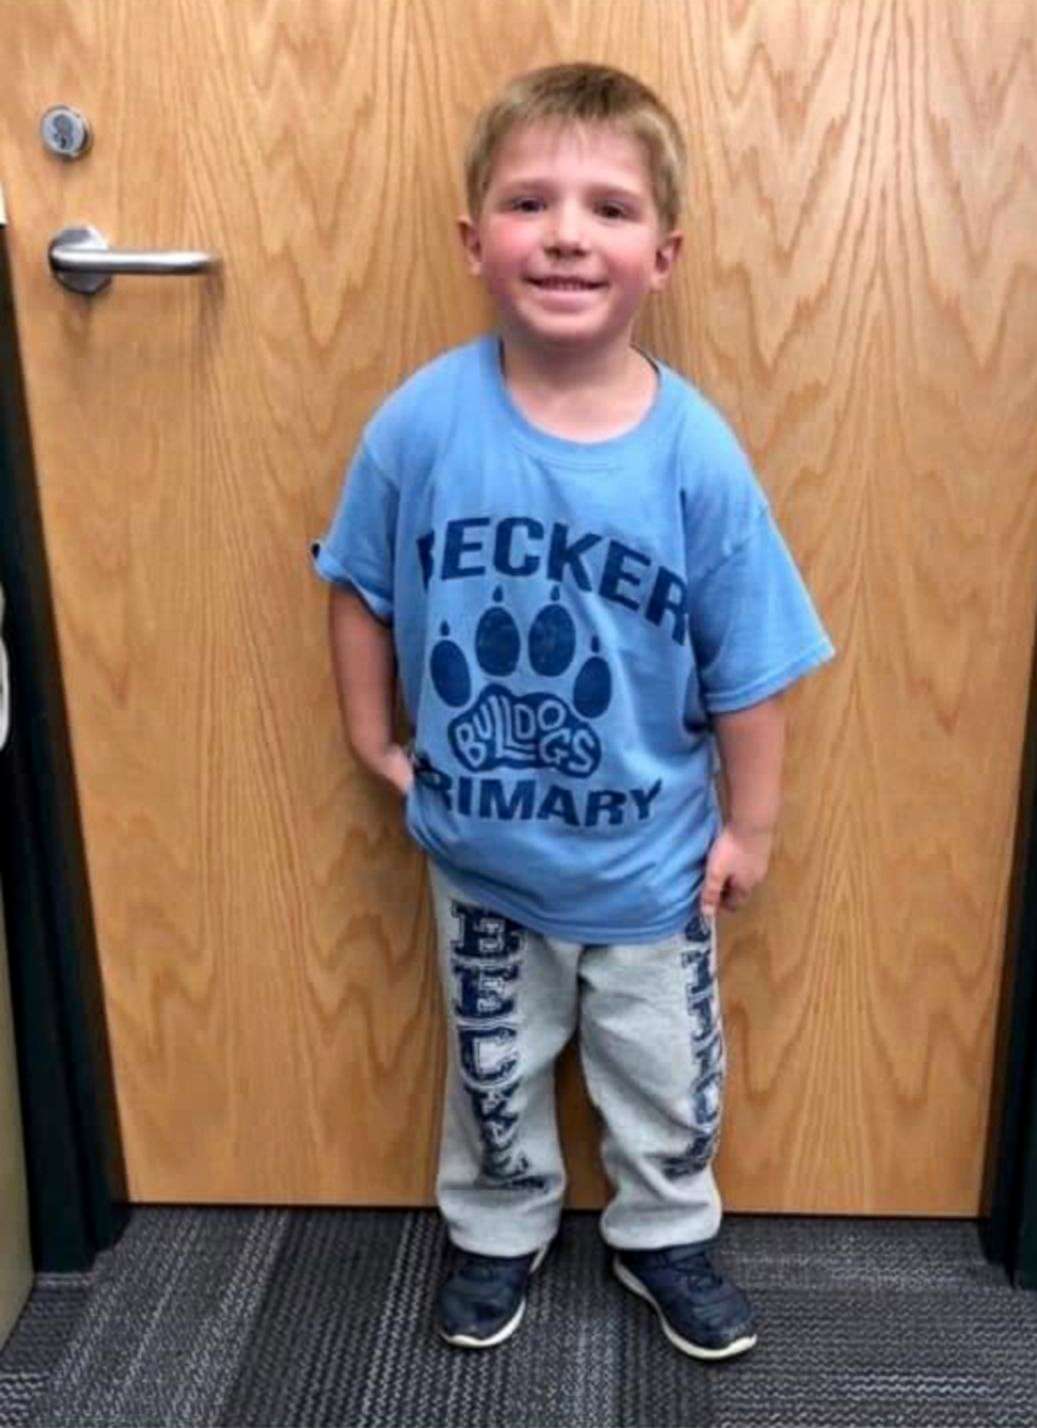 PHOTO: Ethan Haus, 6, was found safe on Oct. 16 after going missing overnight in Palmer Township, Minnesota.